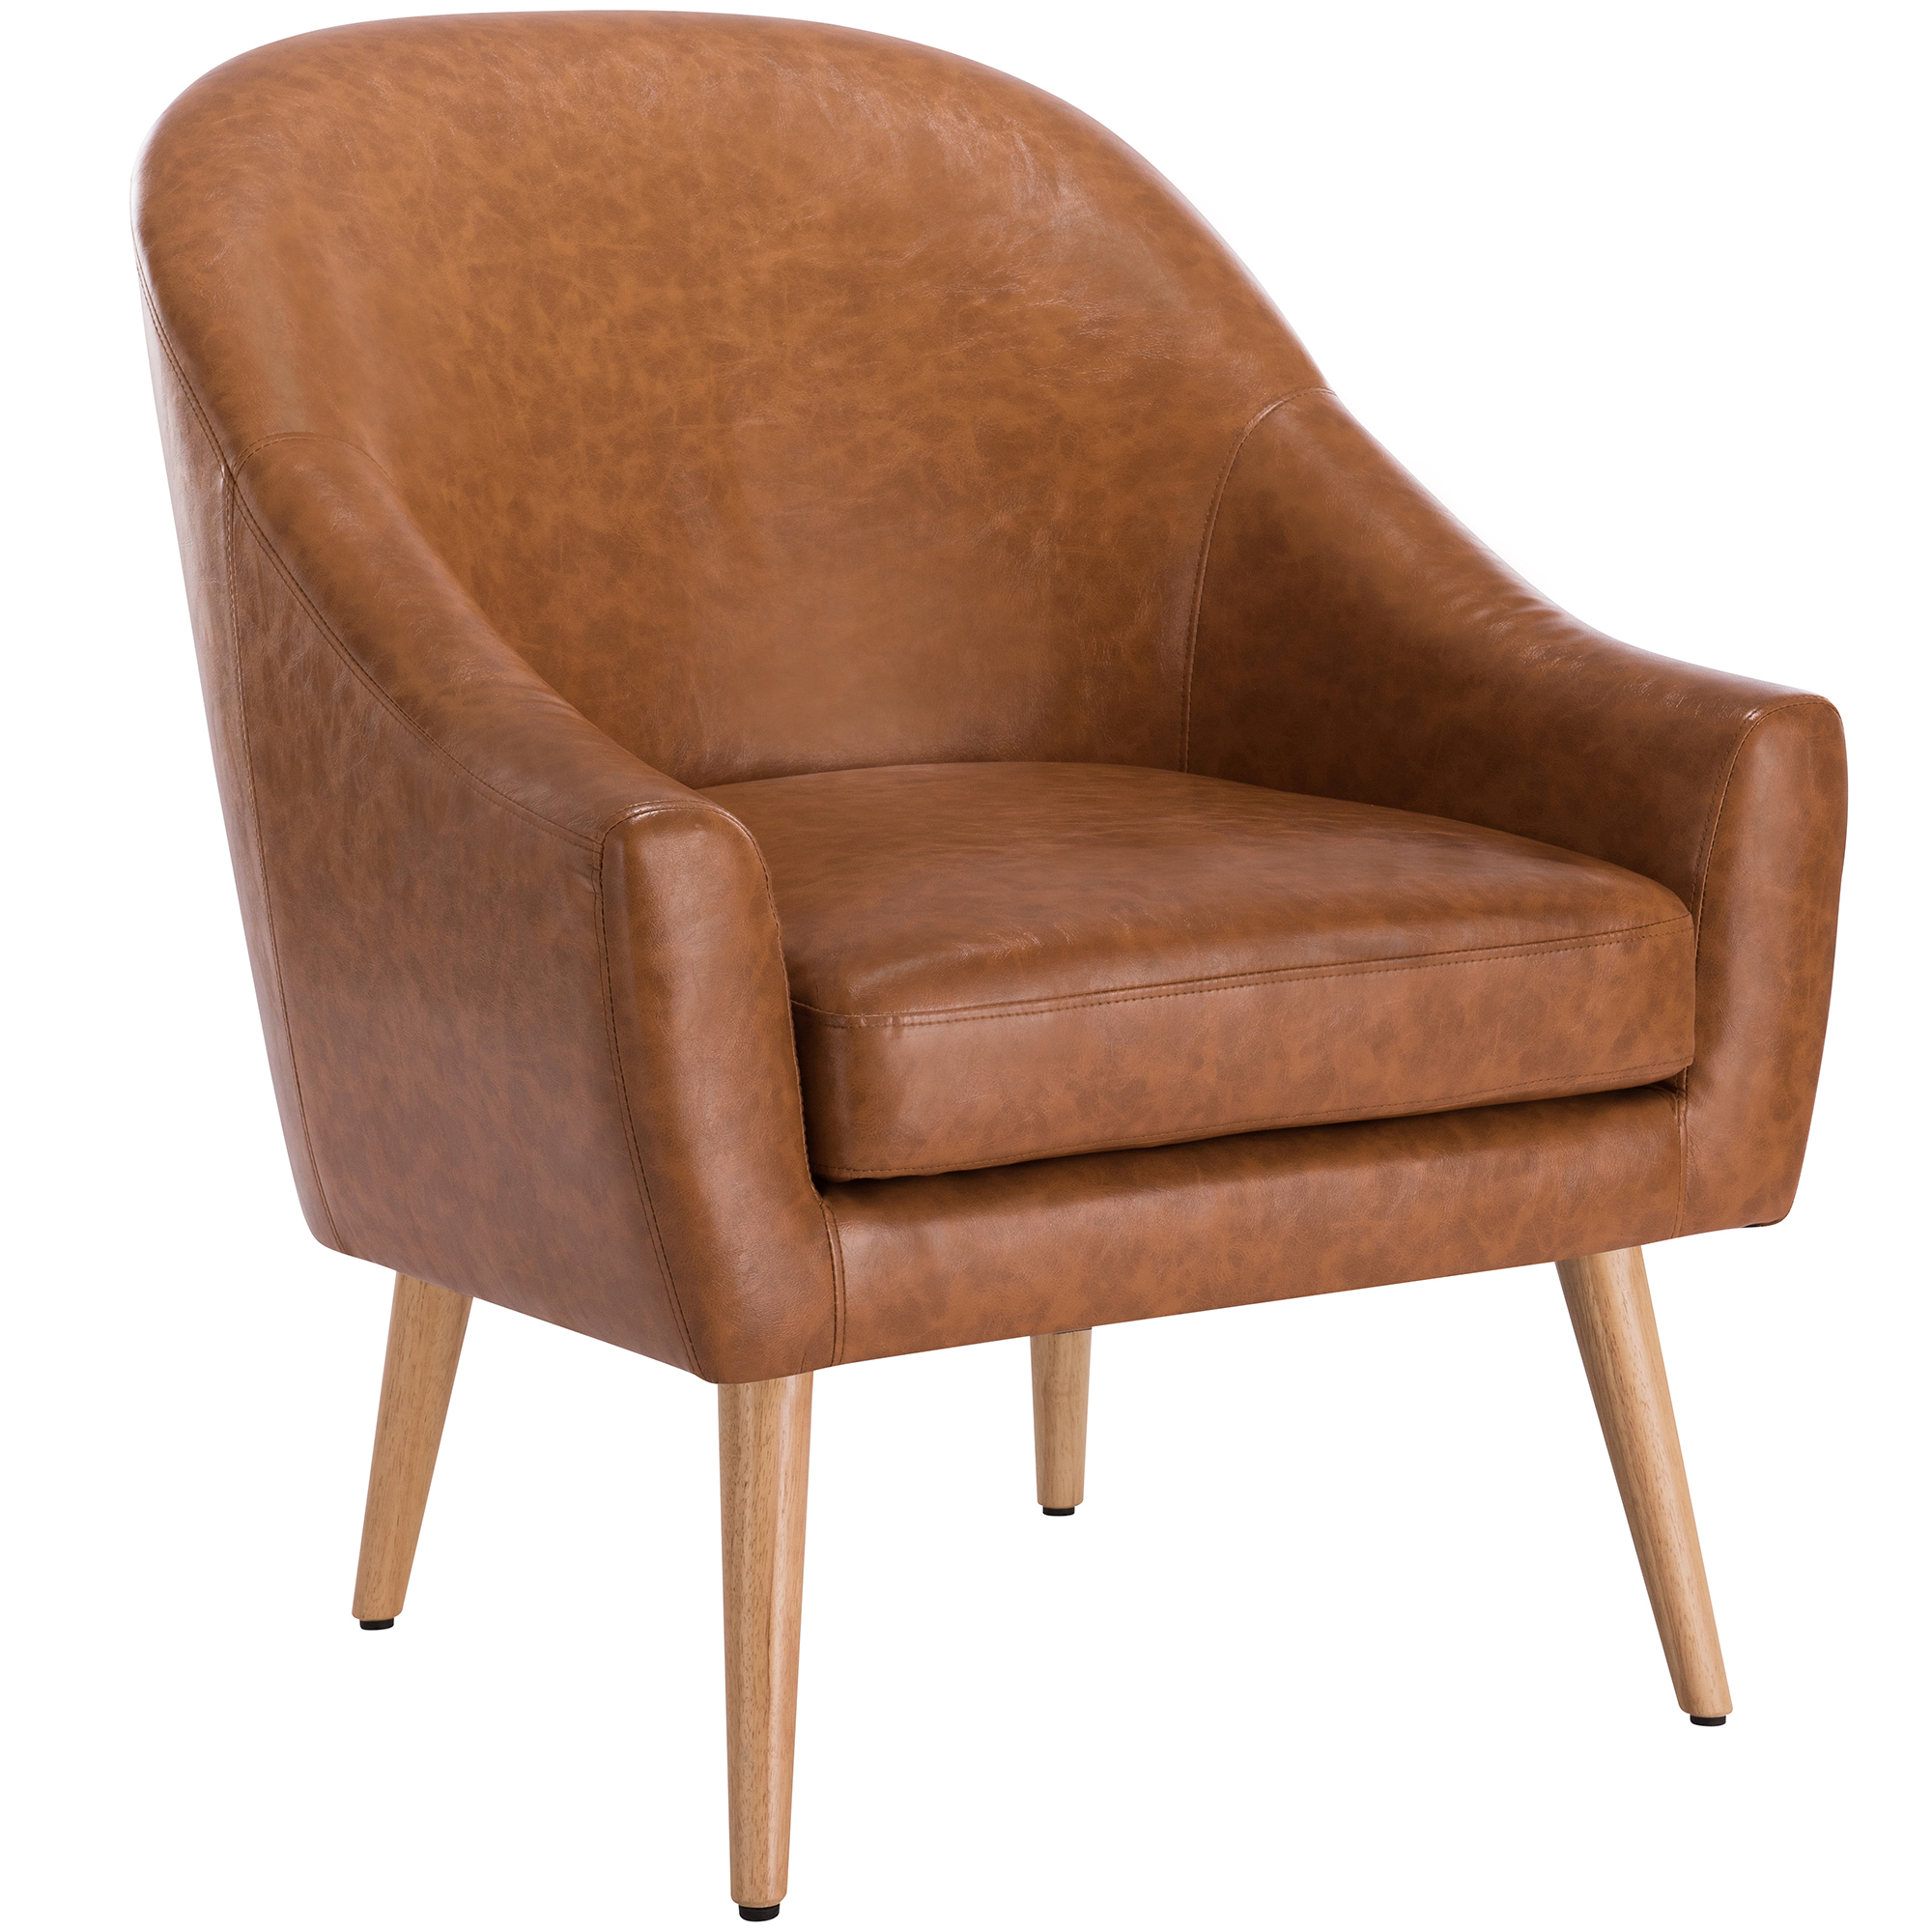 Webster Tan Maya Faux Leather Armchair, Leather Chair Brown